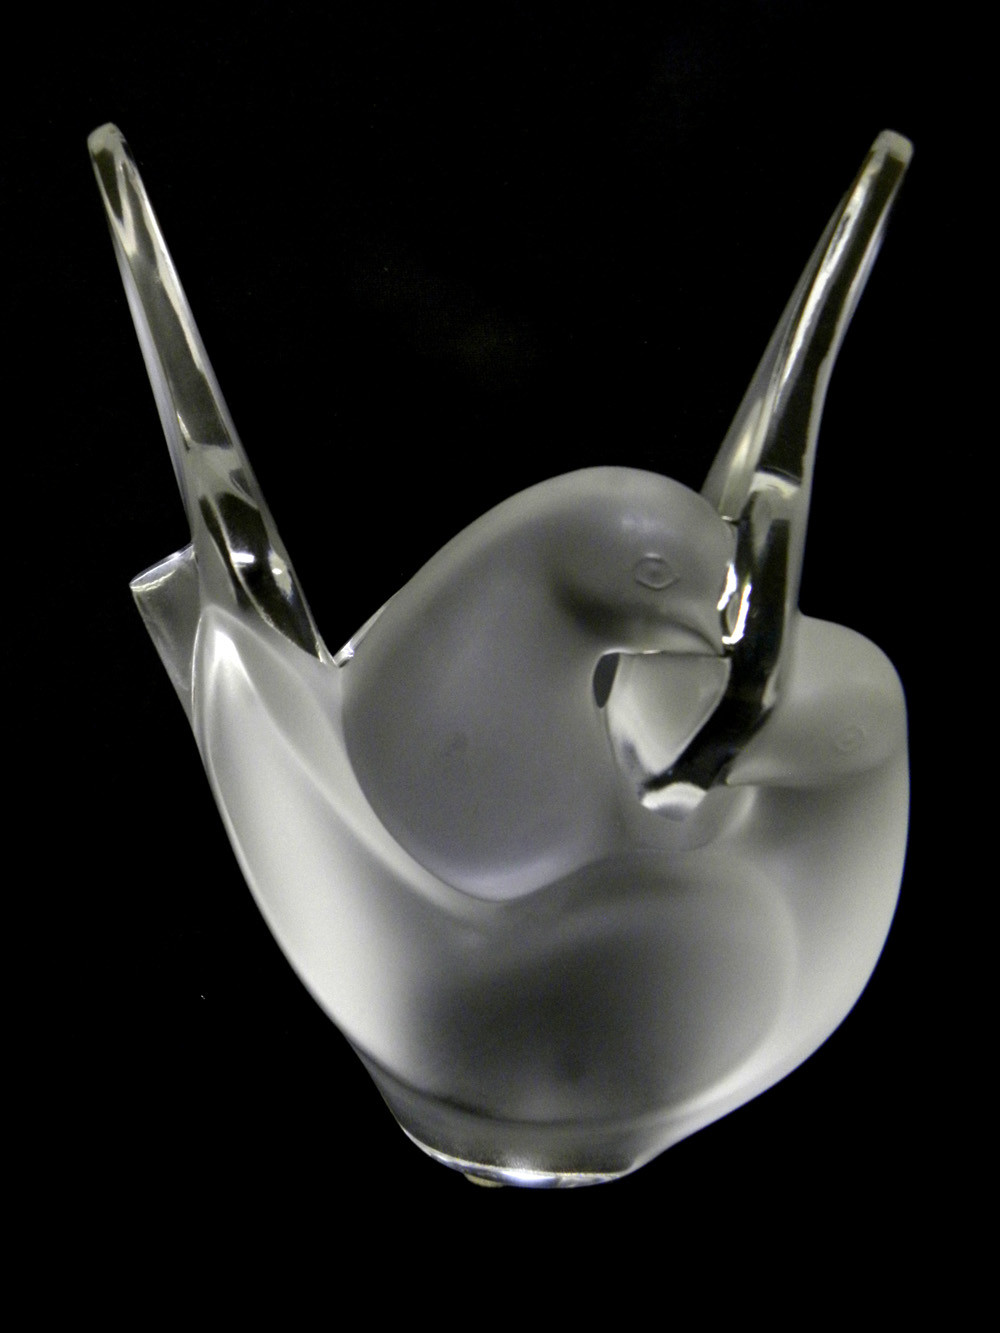 12 Recommended Lalique Dove Vase 2024 free download lalique dove vase of lalique large entwined doves sylvie love birds frosted art glass inside lalique large entwined doves sylvie love birds frosted art glass vase with frog item is in excell